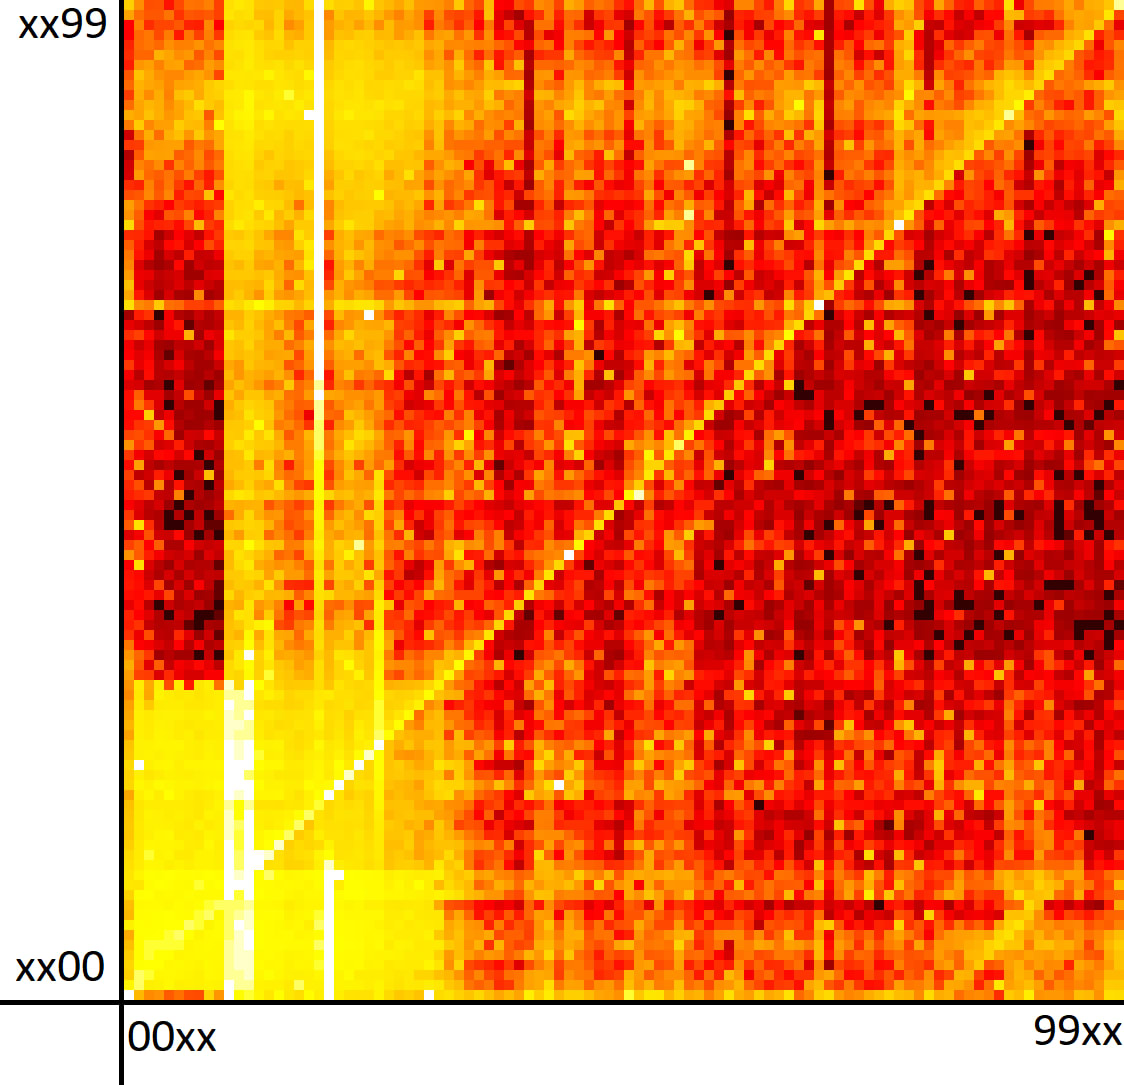 Just made a heatmap of 4 digits passwords in Python, I hope it fits in the sub !